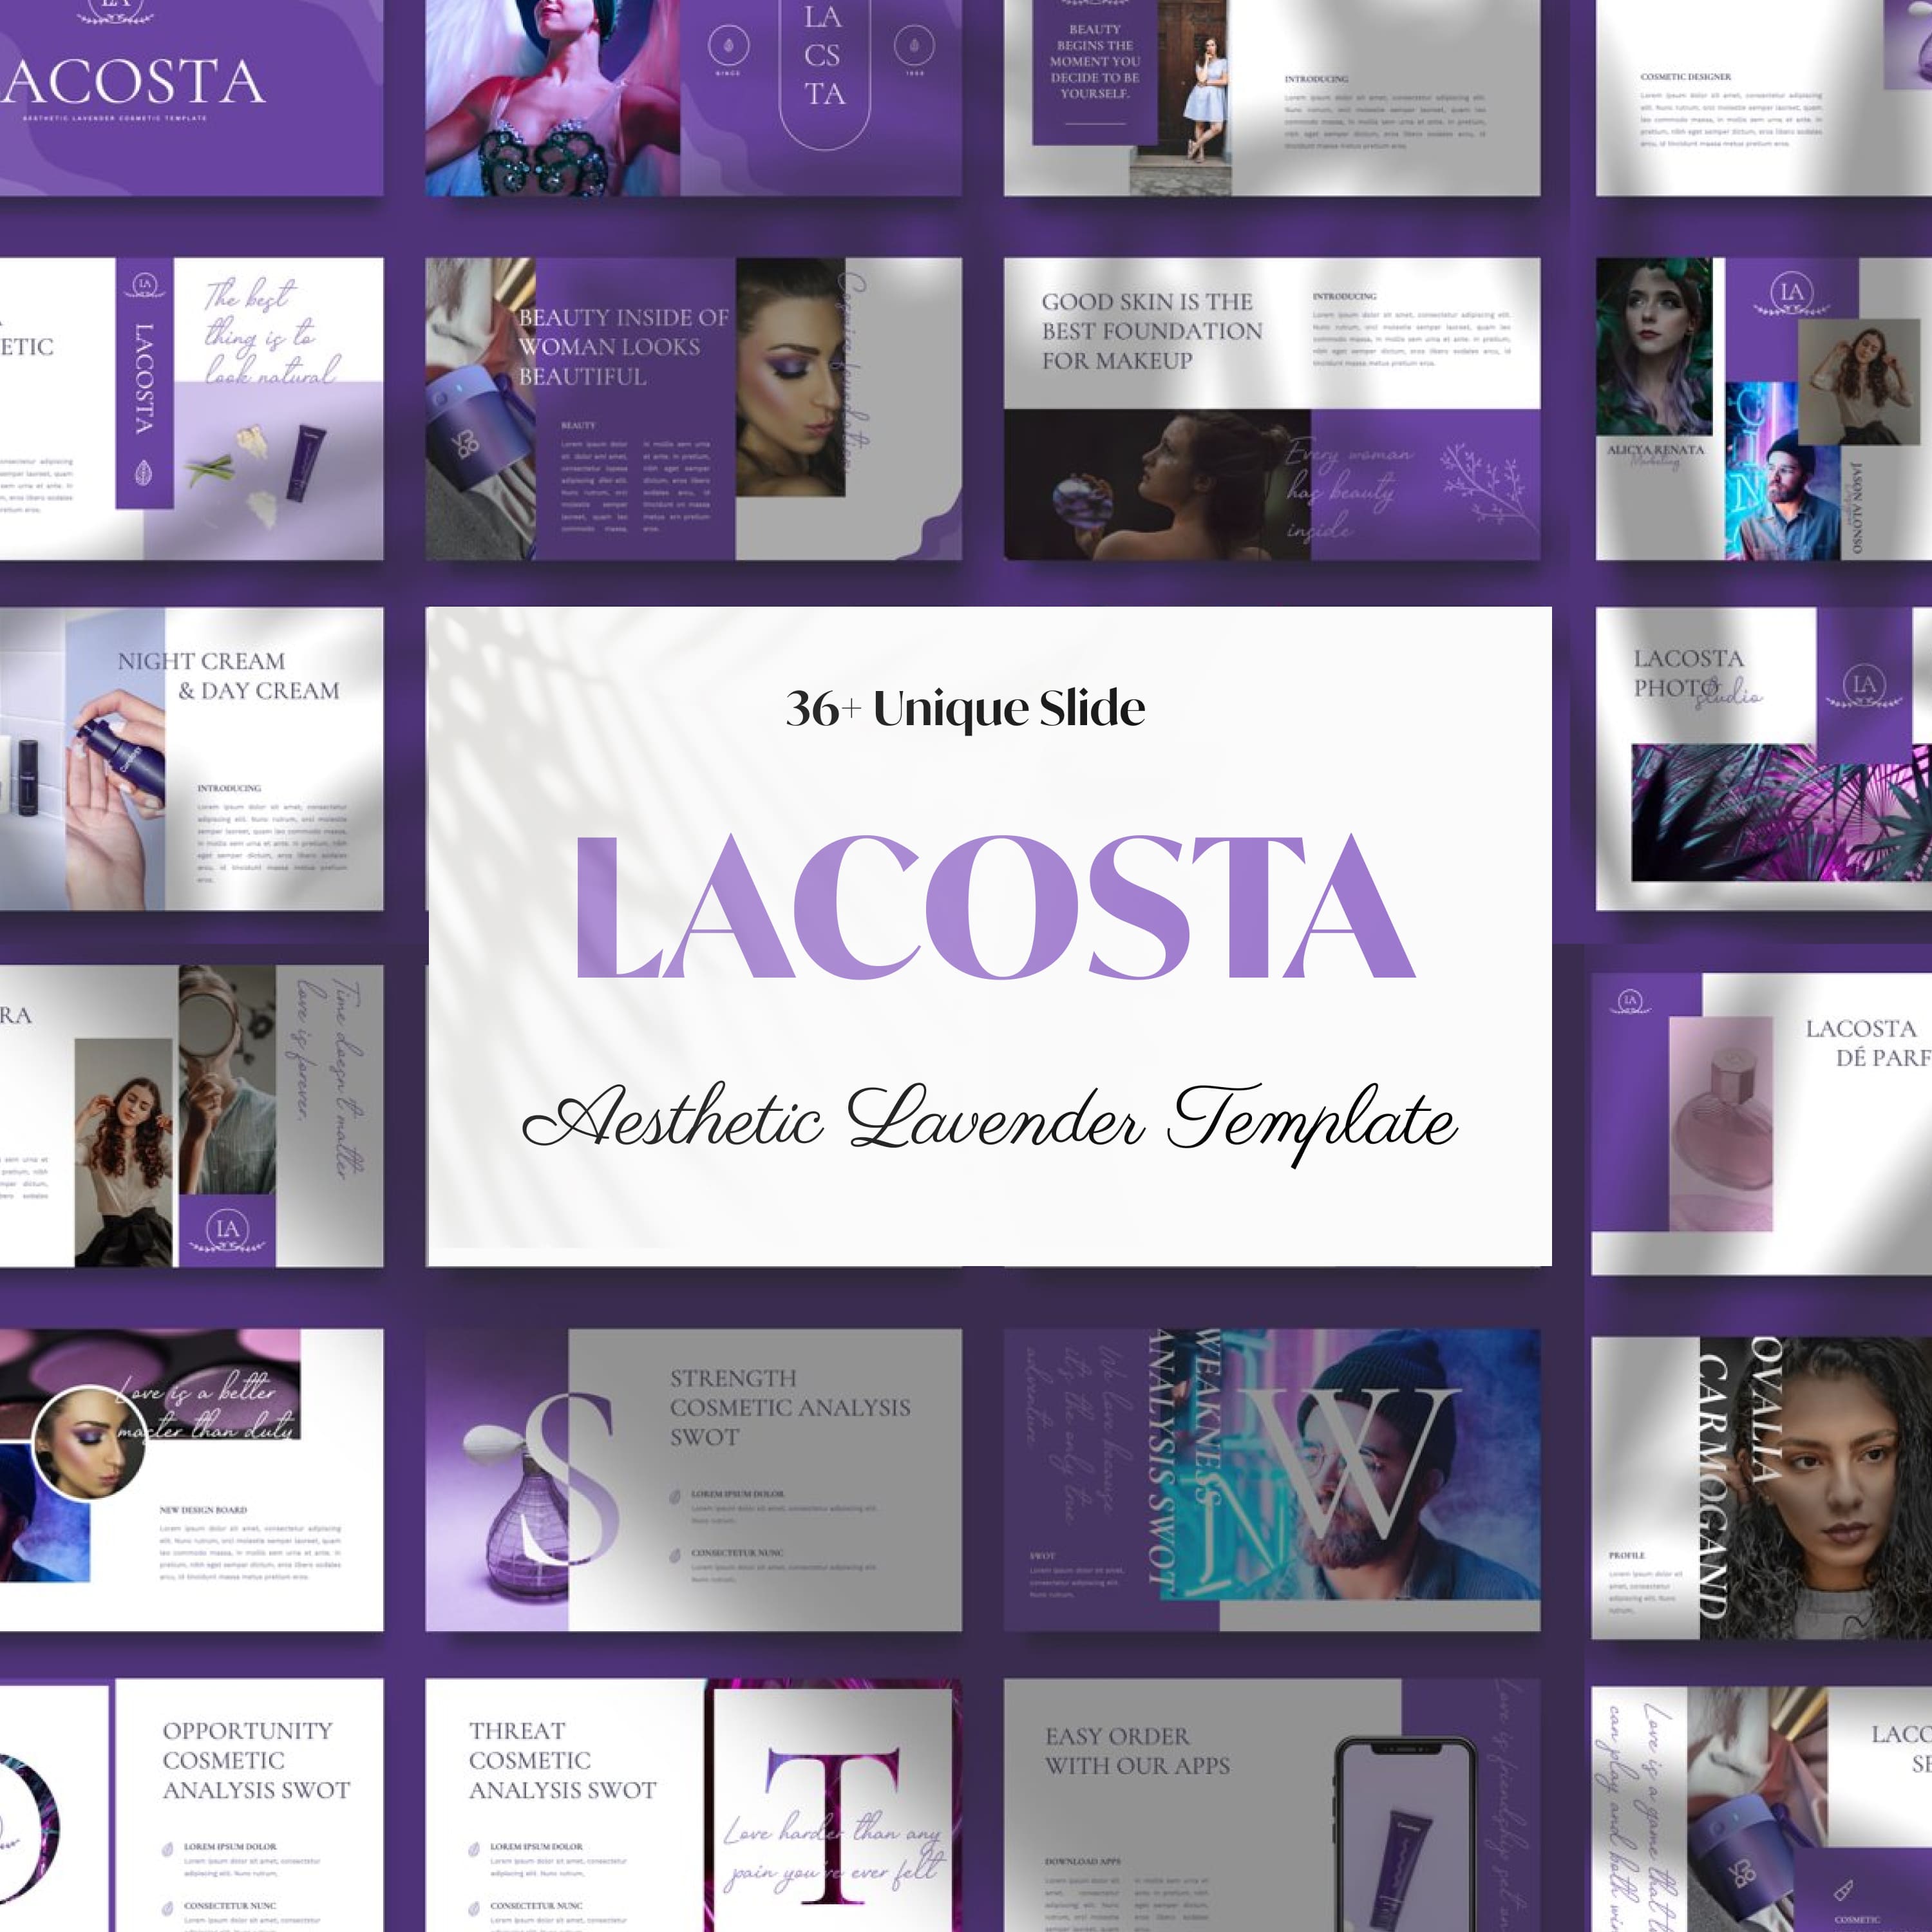 LACOSTA- Aesthetic Lavender Template cover.